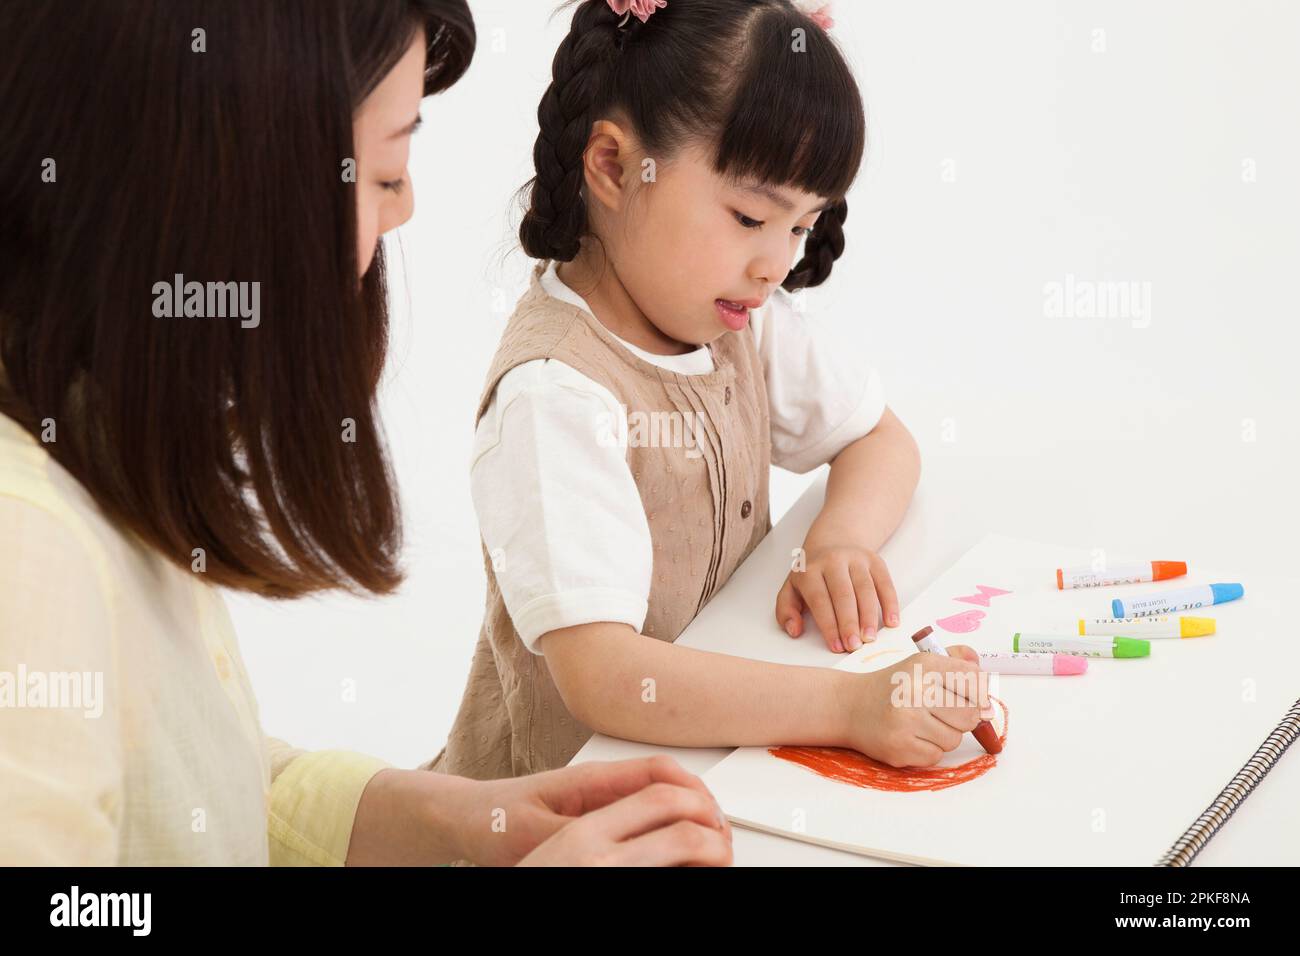 Parent and child painting Stock Photo